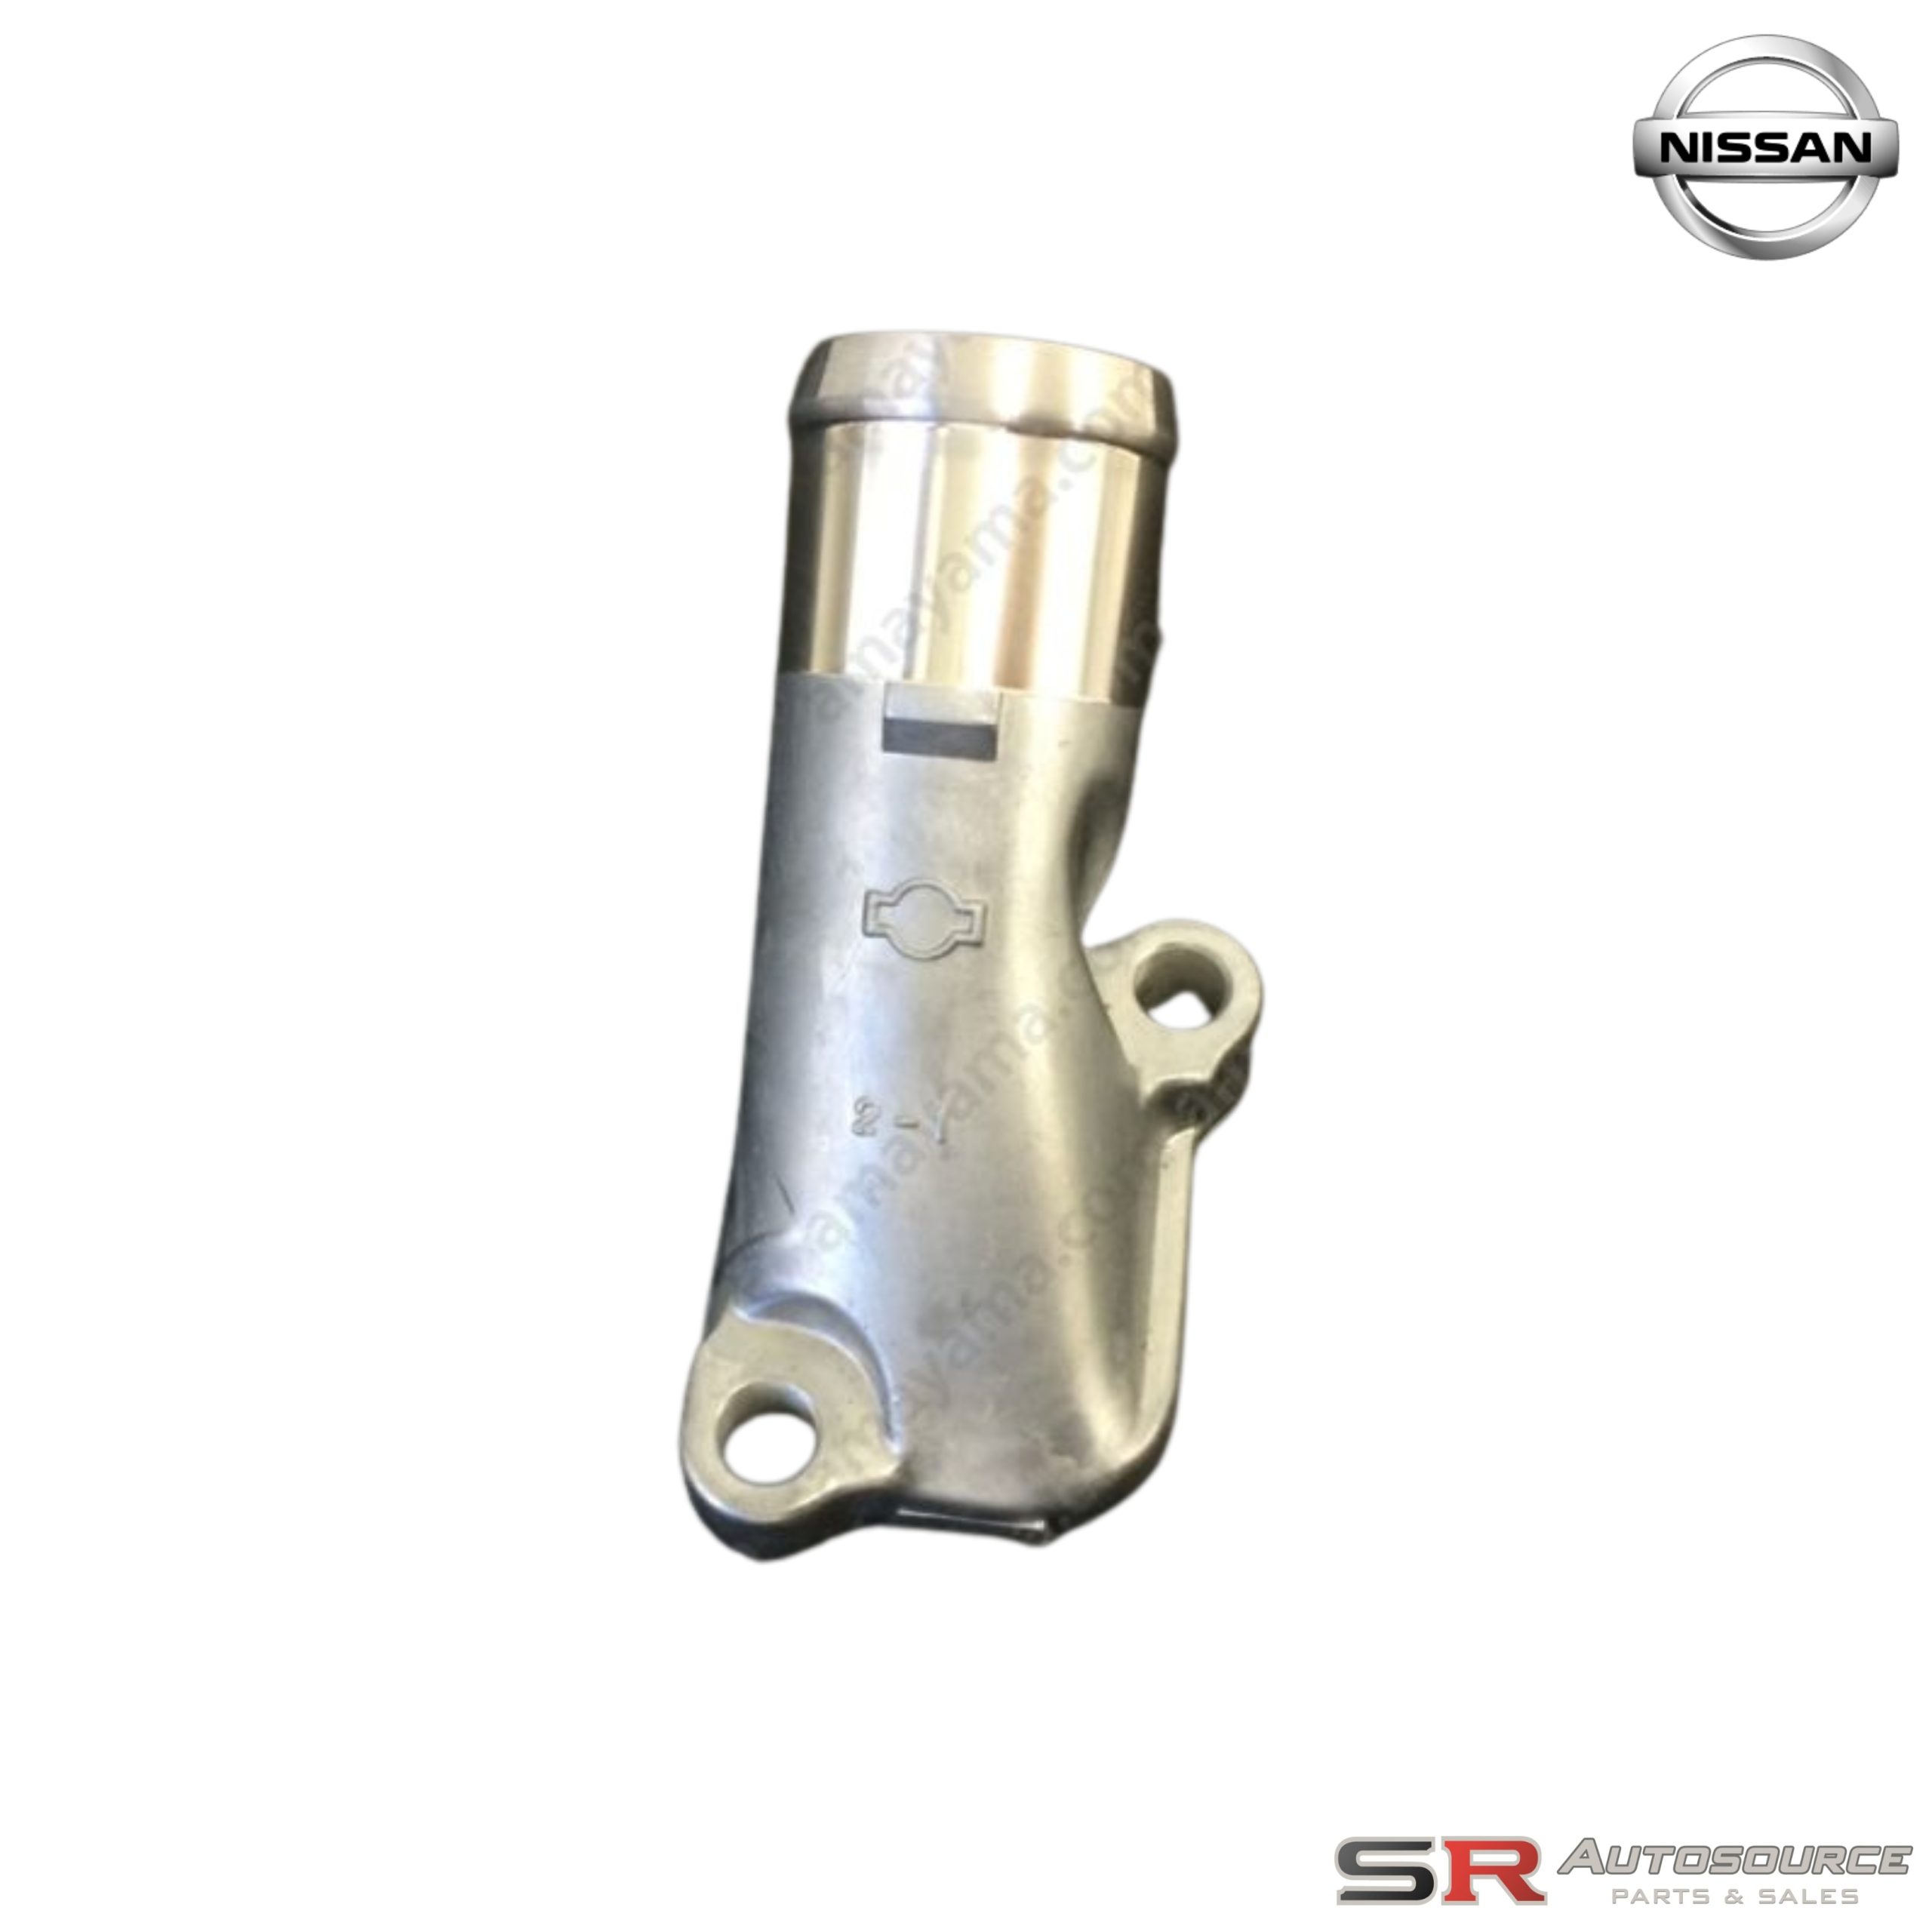 OEM Nissan Water Neck Outlet to suit RB26 without Take Off